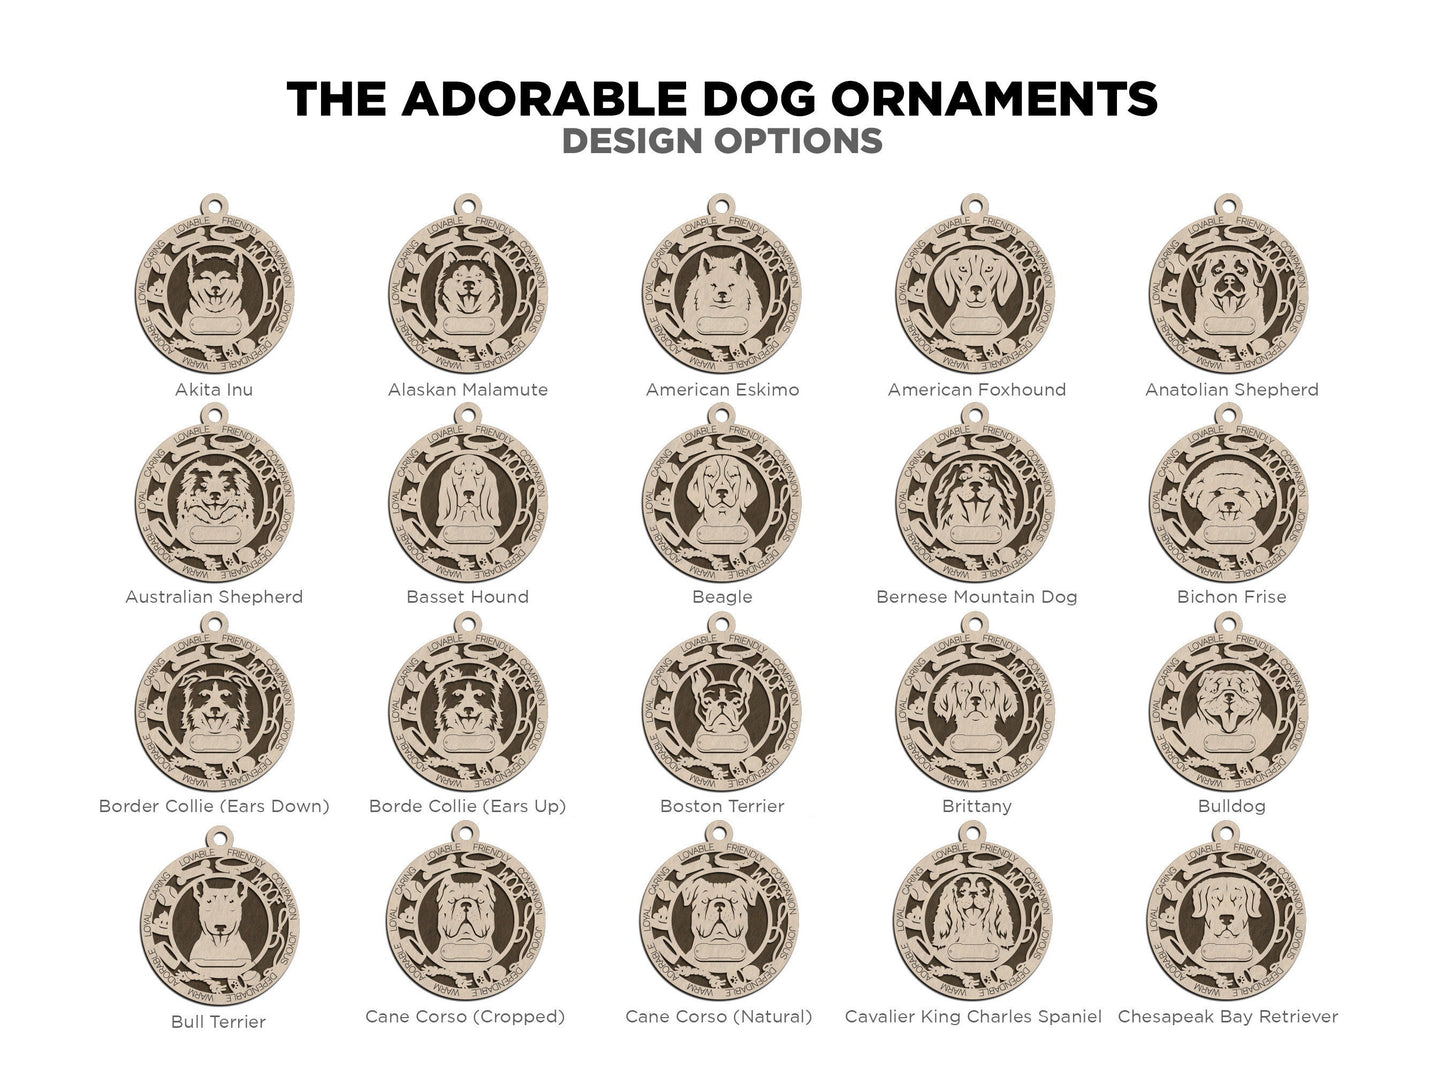 Adorable Dog Ornaments Pack 1 - 50 Breeds included with 2 Versions - 100+ Ornaments - SVG, PDF, AI File Download - Sized for Glowforge